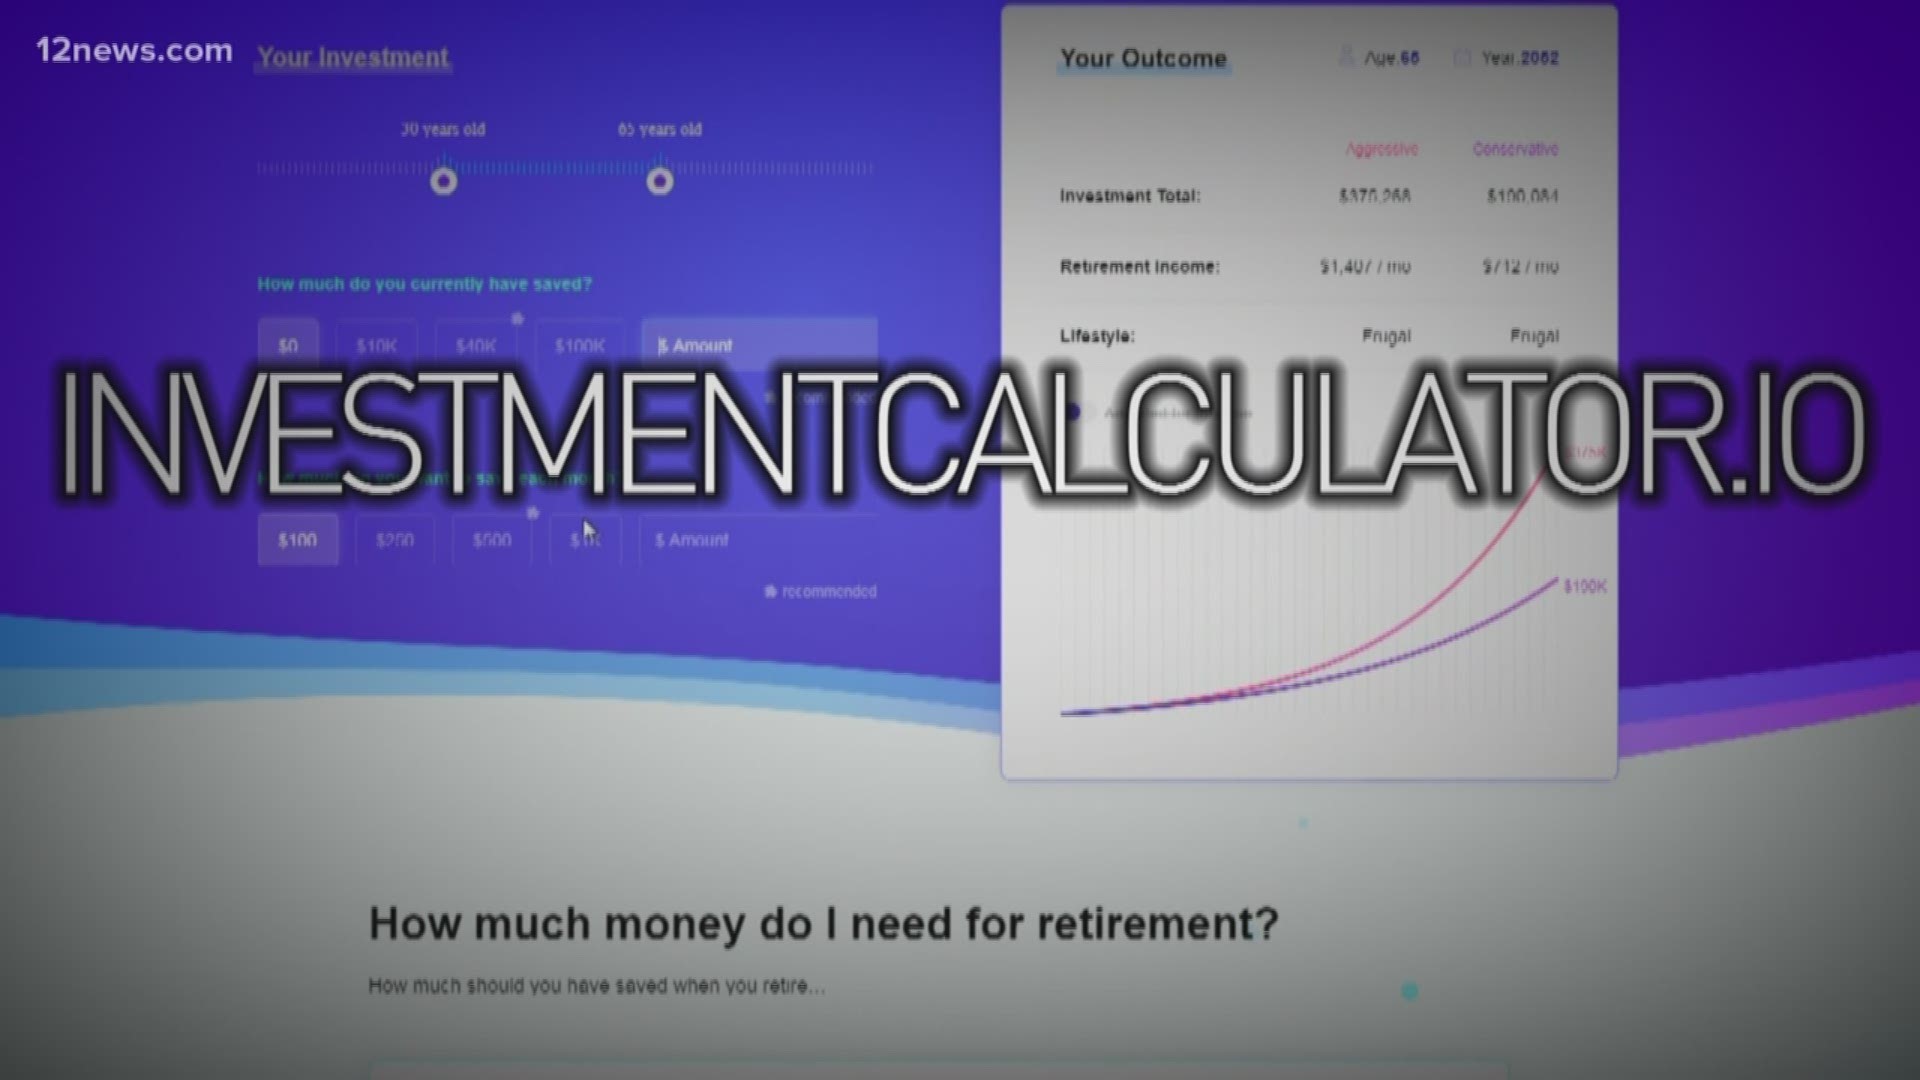 66% of millennial have nothing saved for retirement which helped these two millennials create the investment calculator.